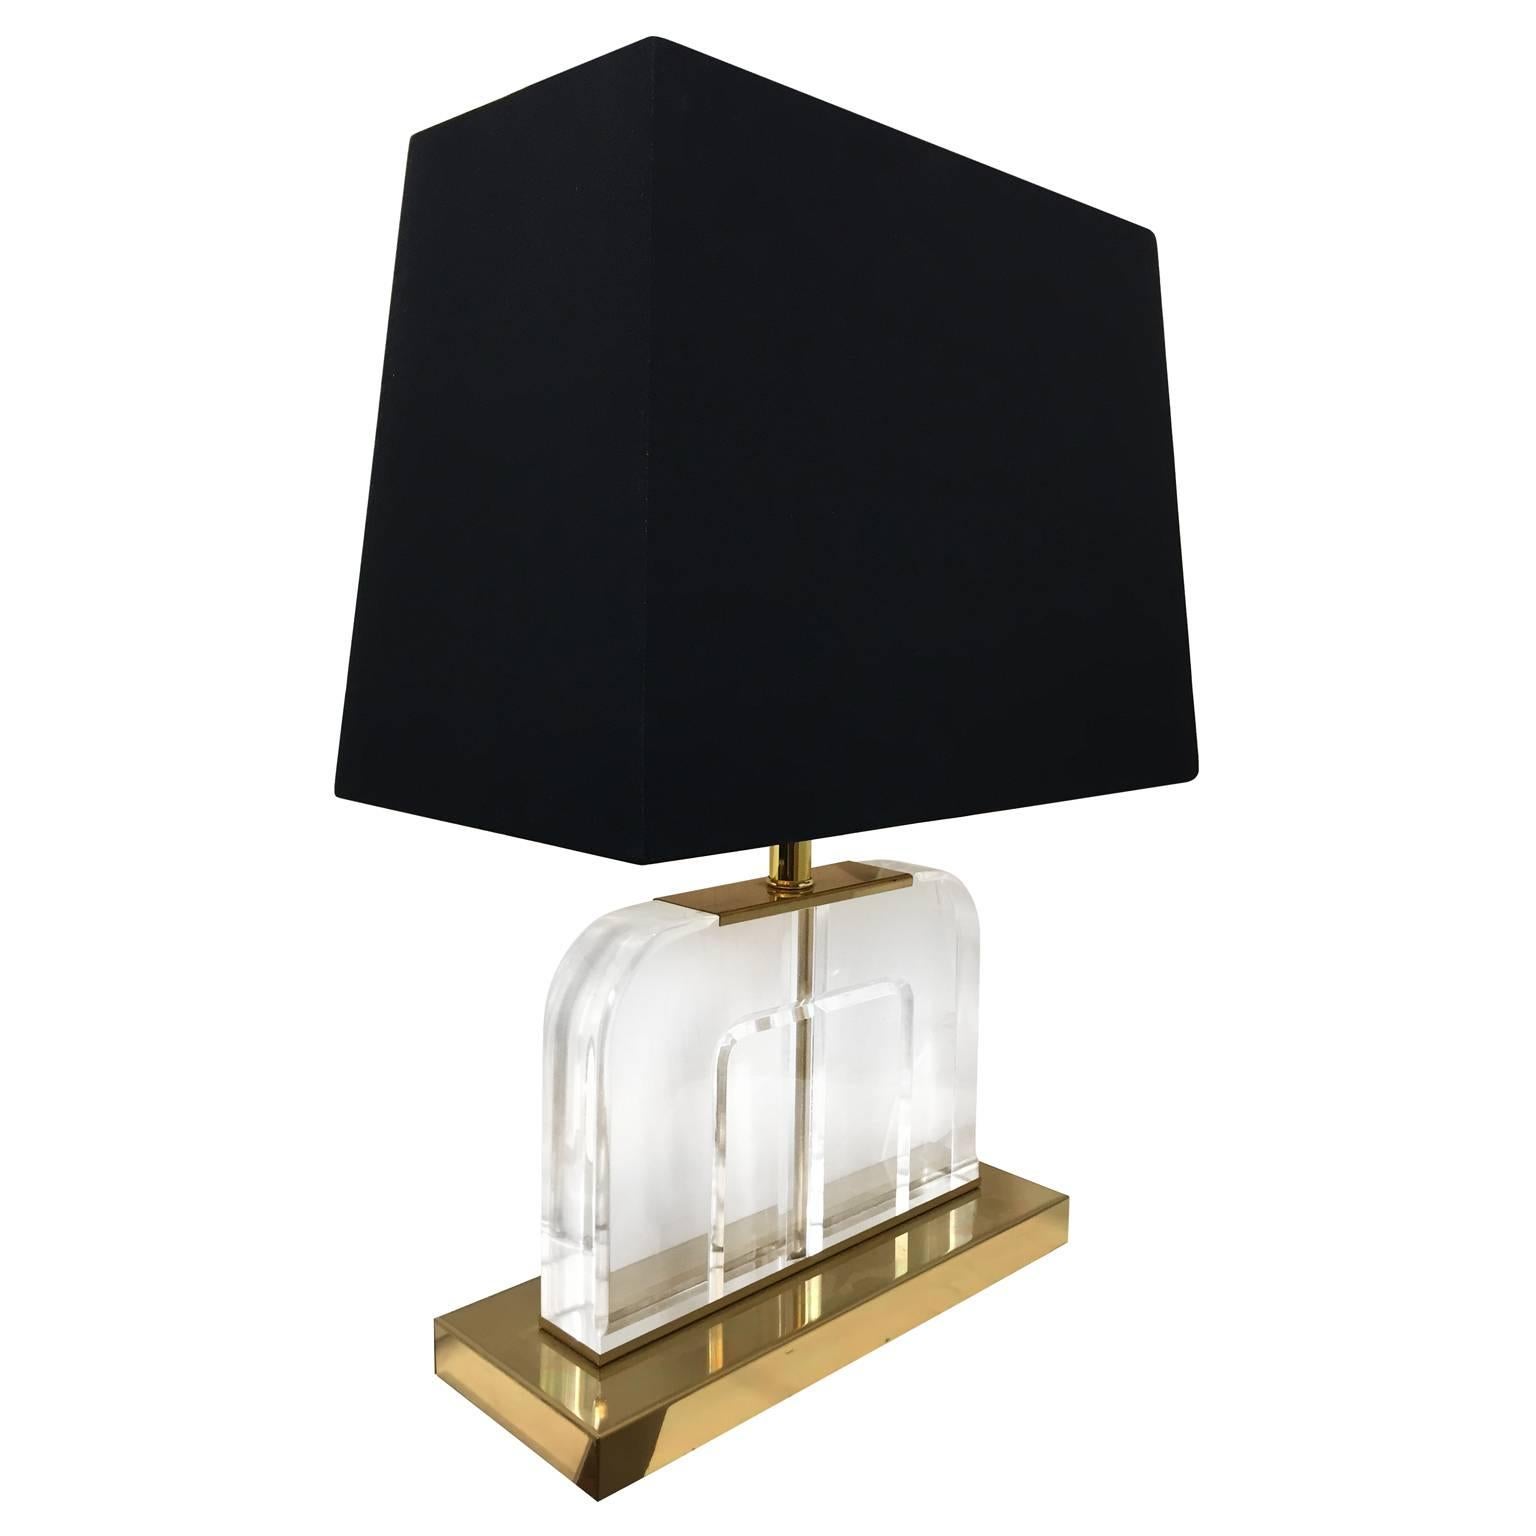 Vintage curved Lucite table lamps on brass base. 

Pair available, priced individually.